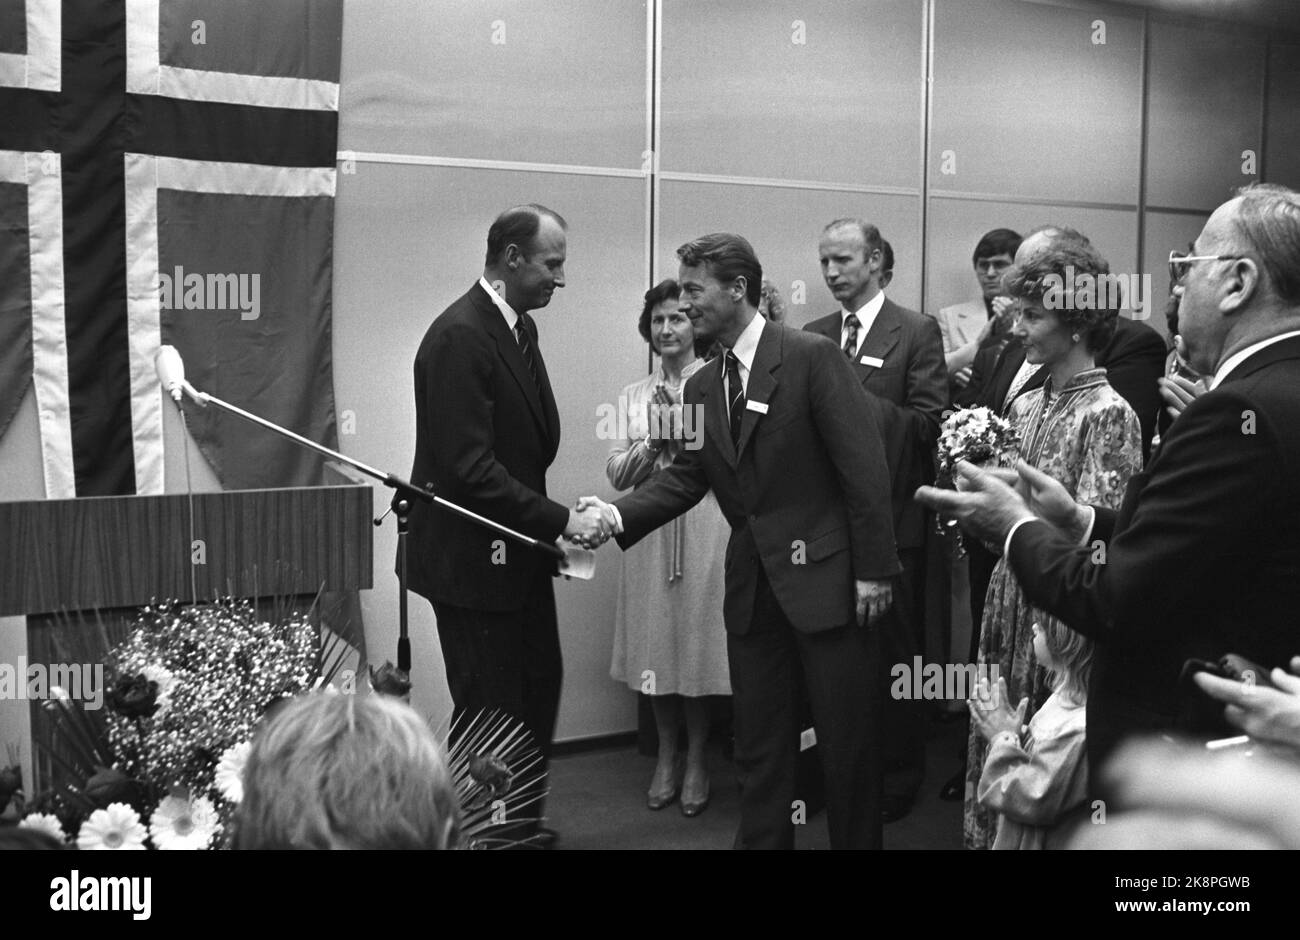 West Germany November 26, 1979. Crown Prince Harald and Crown Princess Sonja visit West Germany. Here Crown Prince Harald at the opening of the Norwegian Export Council new premises in Karl Arnold Platz 2. The Export Council Chairman and General Director Gerhard Heiberg thanks the speech held by the Crown Prince. Photo: Vidar Knai / NTB / NTB Stock Photo